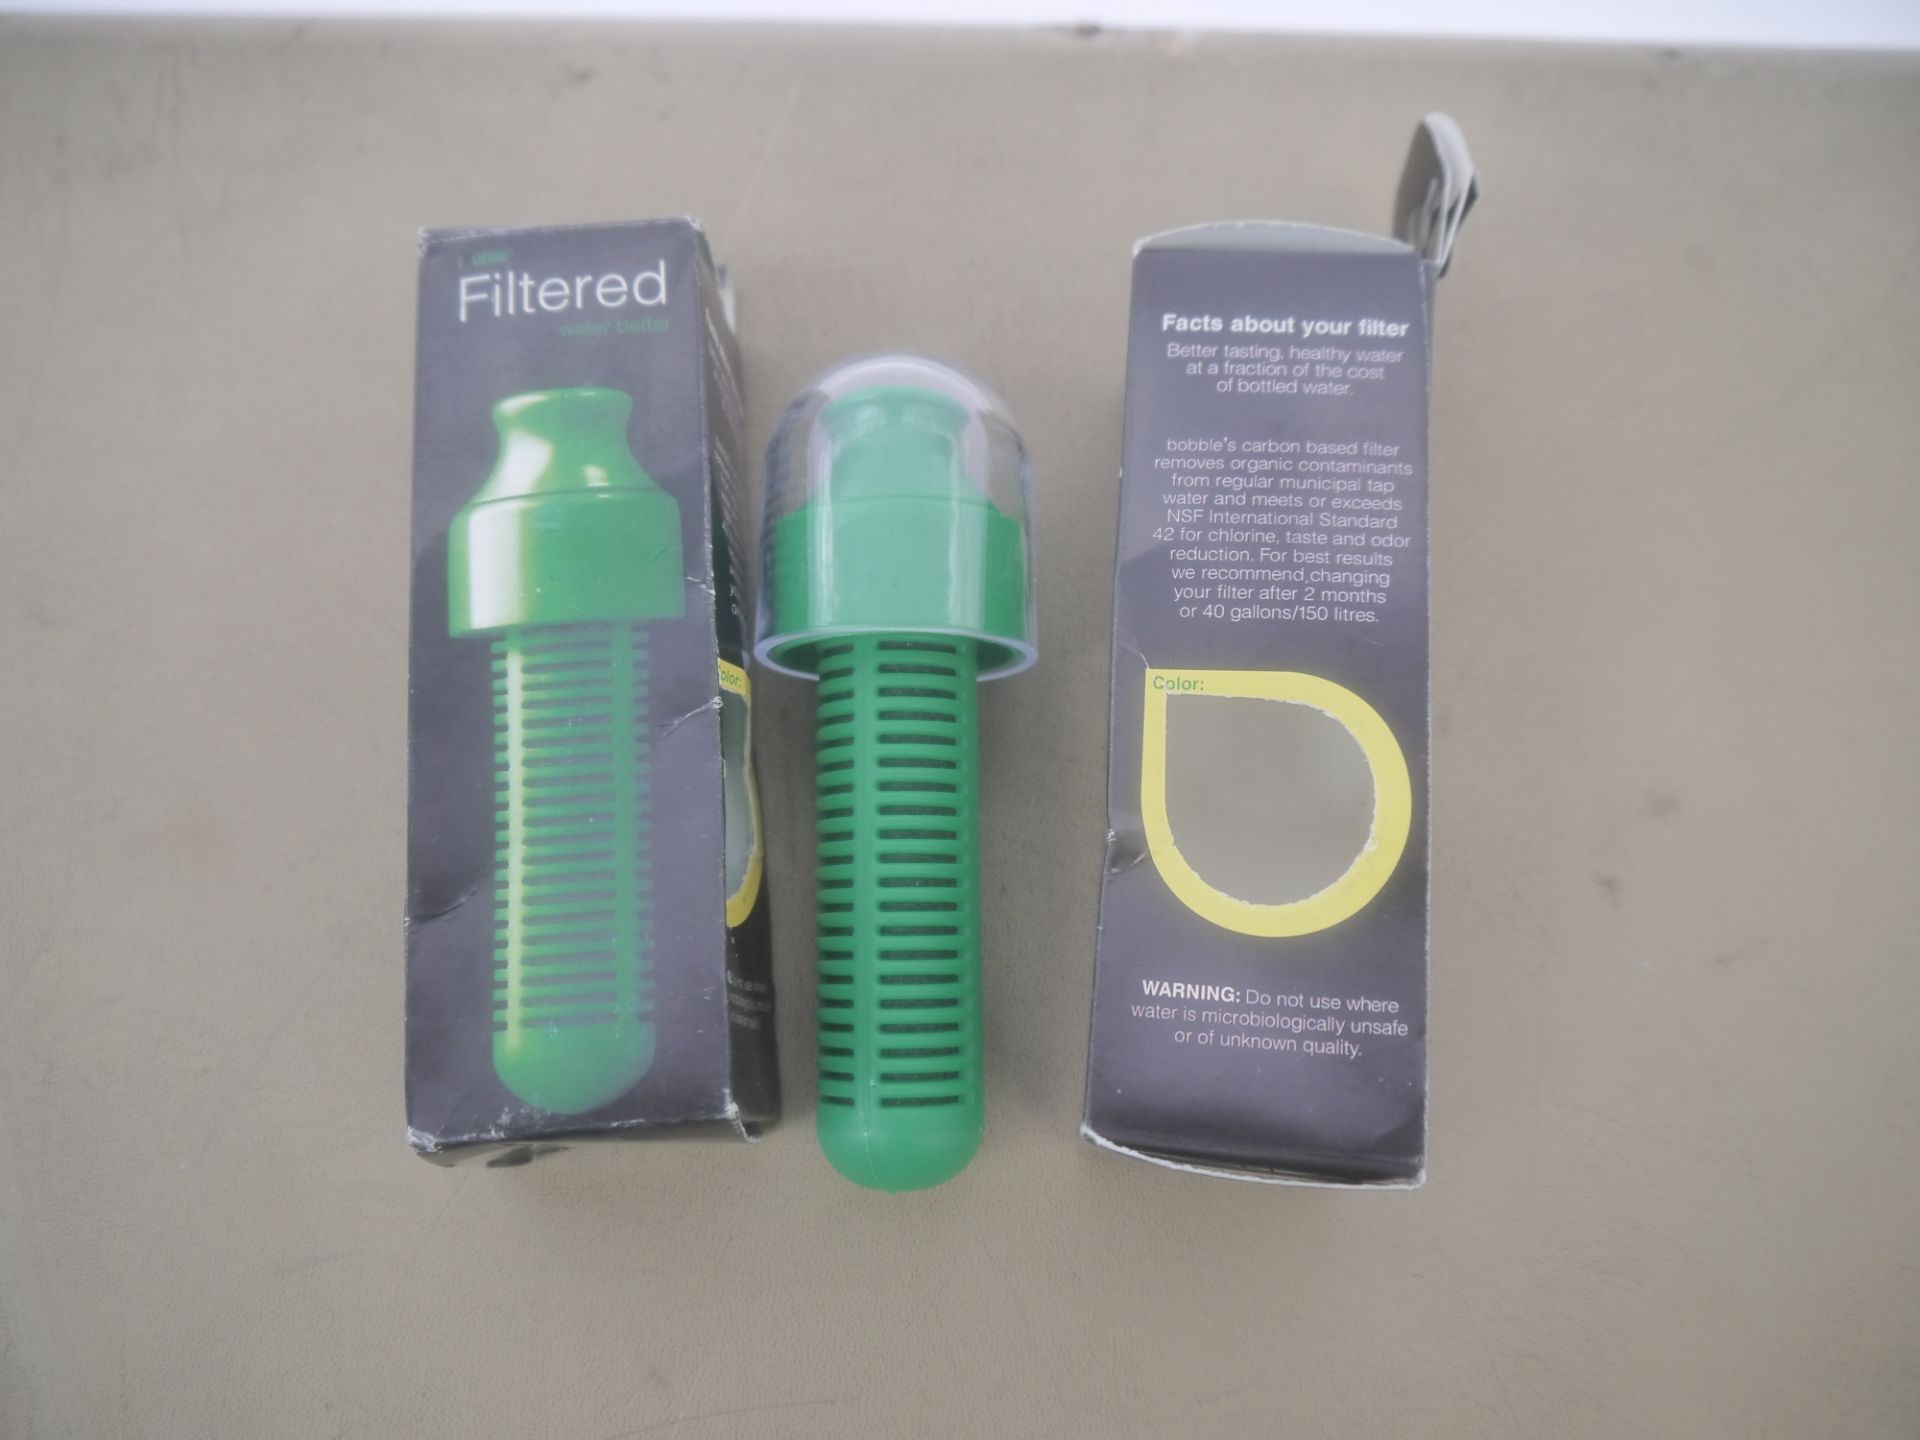 10x Green Filters for filtered water bottles, that's enough filters to provide 1500 full water